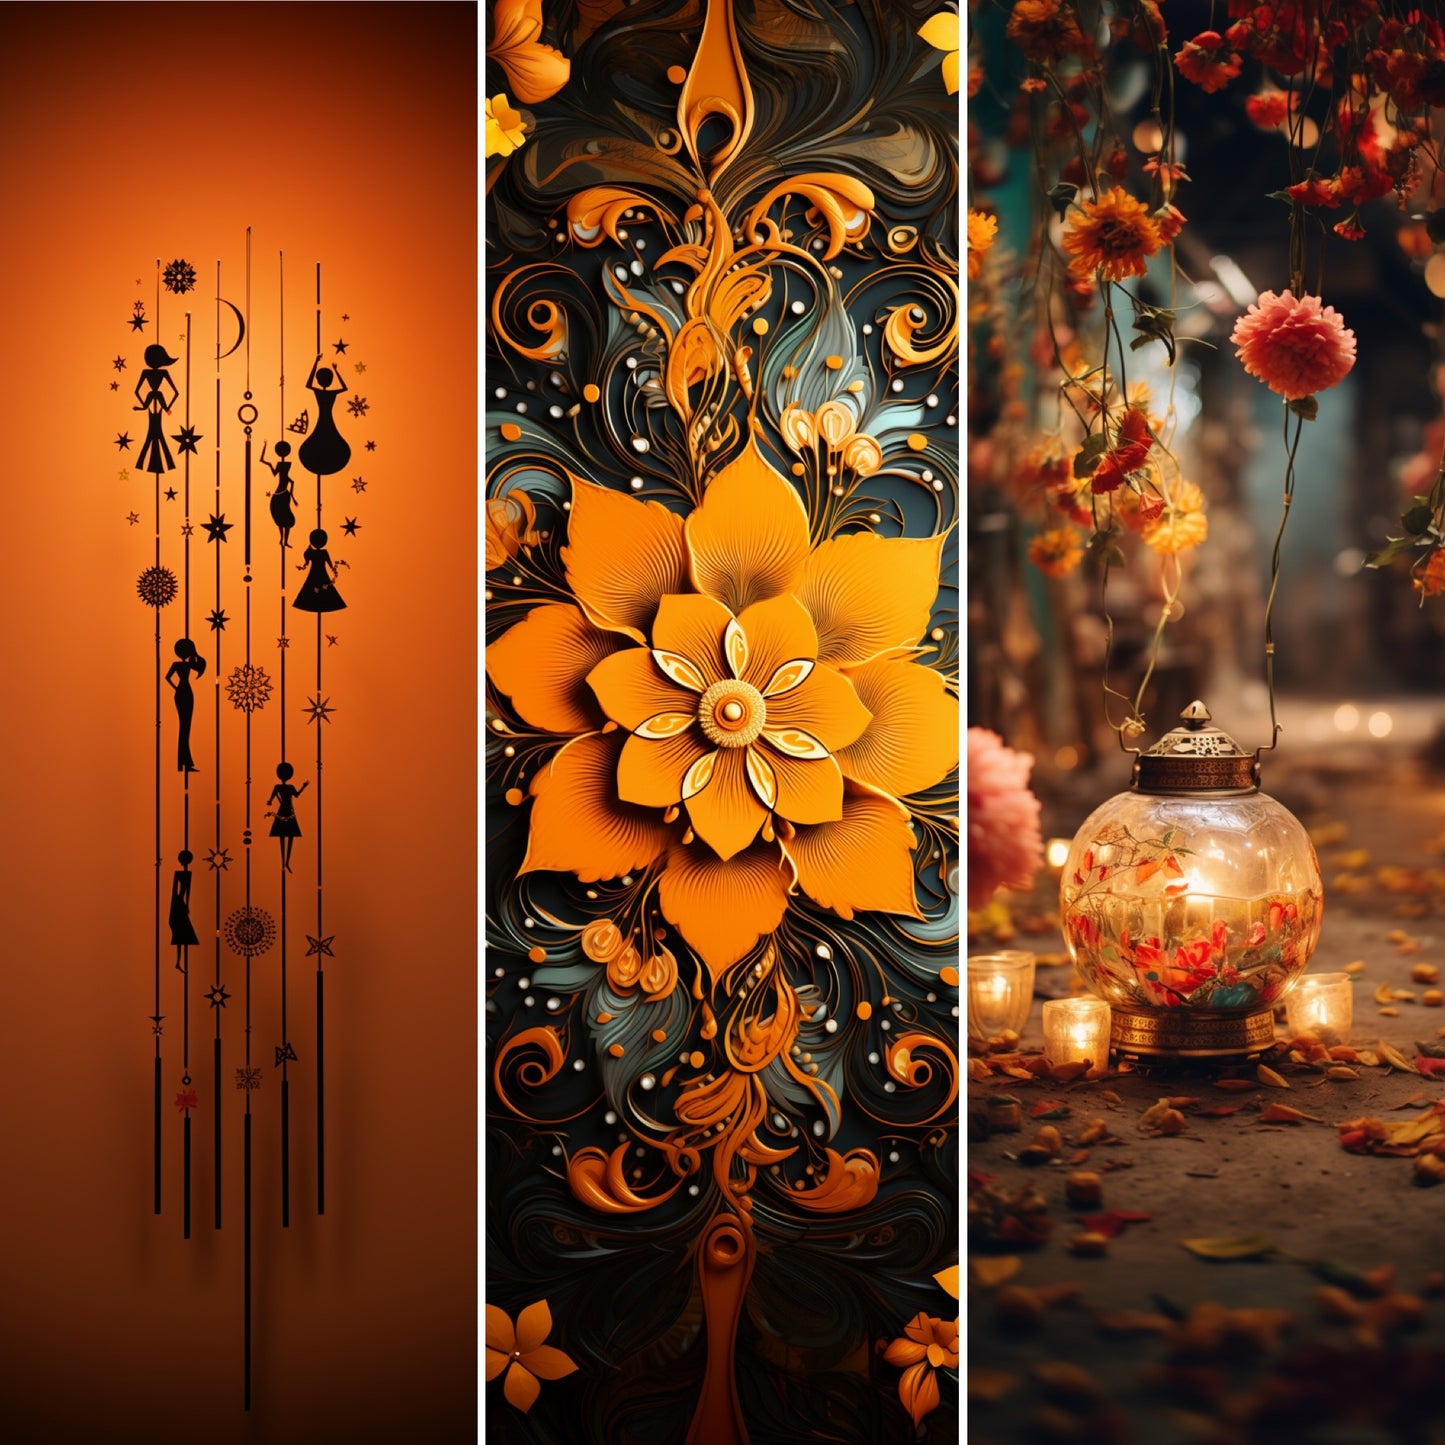 Sacred Luminescence: Embracing the Festive Spirit with Lights and Flowers